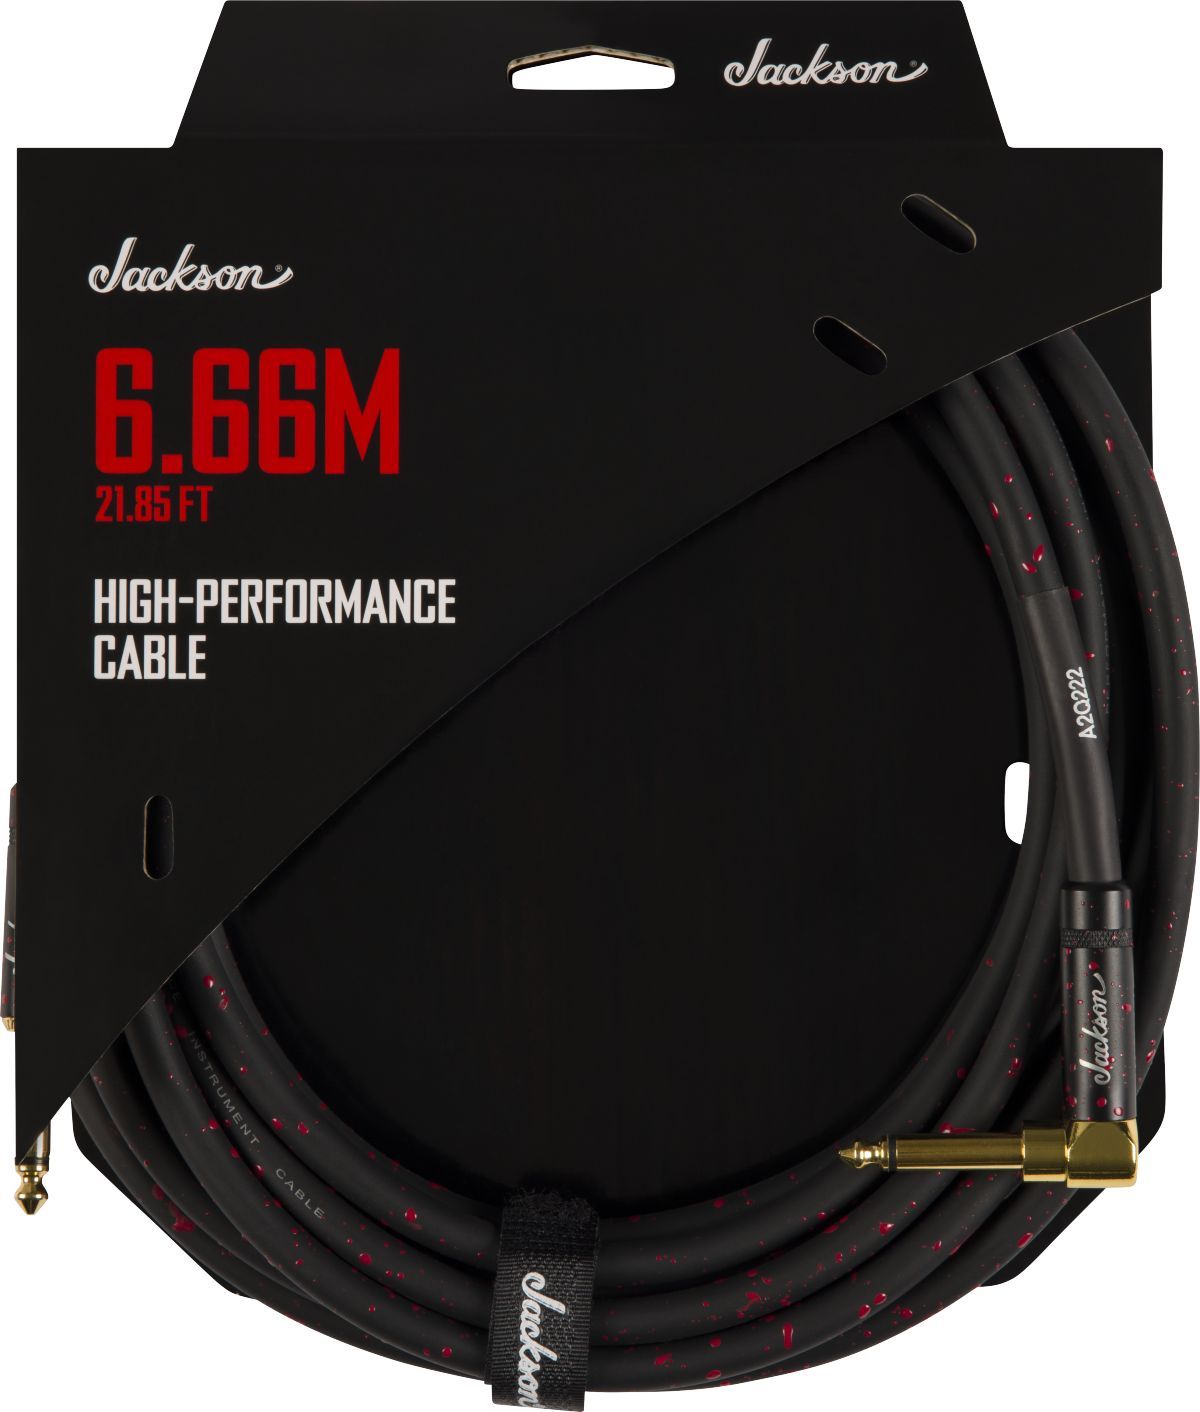 Jackson High Performance Cable Black and Red 6.66 m